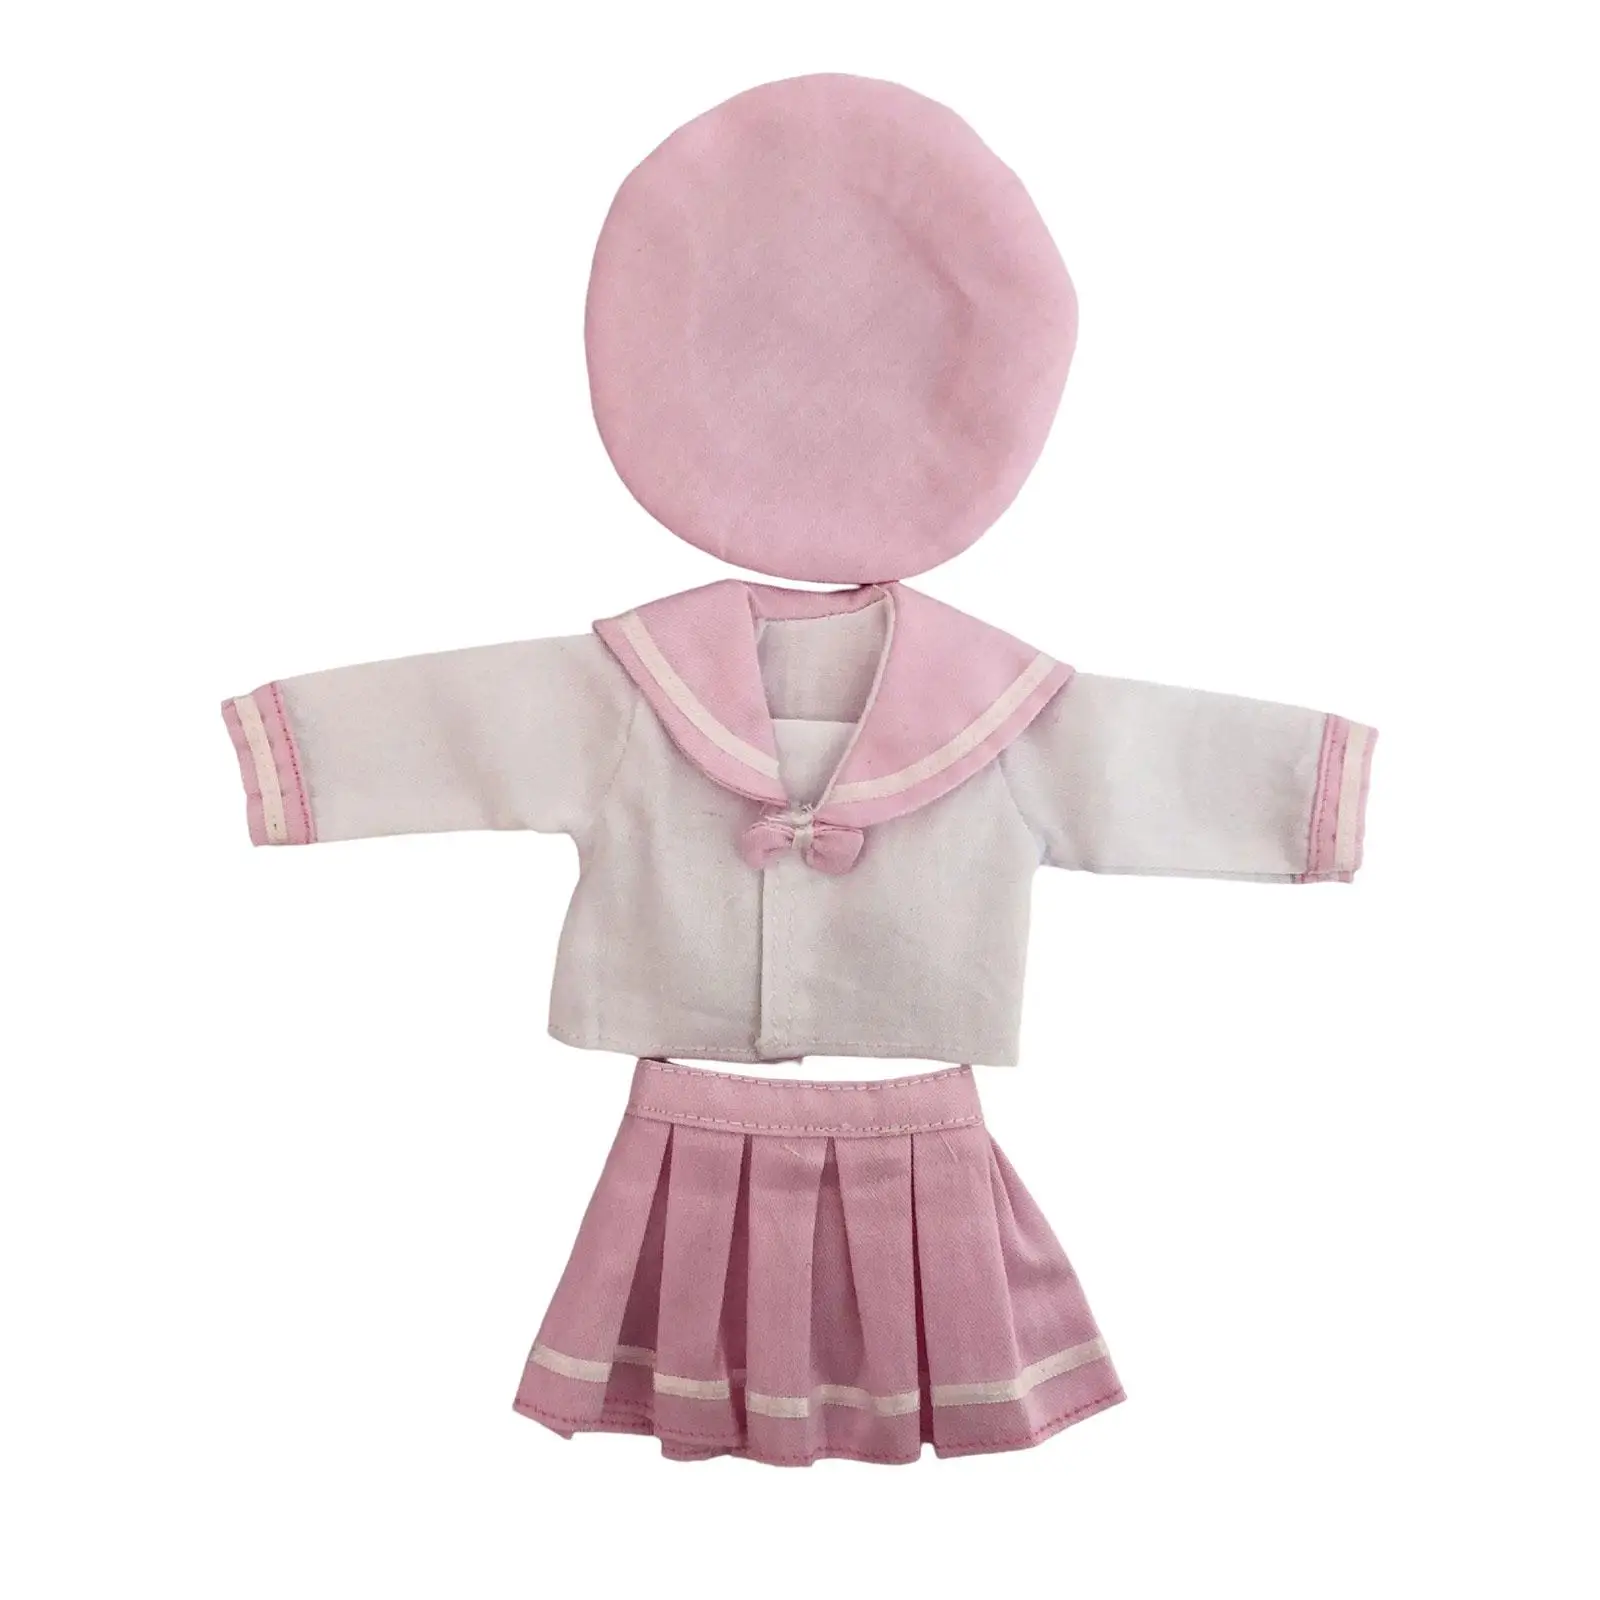 Fashion Doll Clothes Sailor Suit School Uniforms Outfits for 30cm 12`` Doll Birthday Gift Accessory Dress up Girl Toy